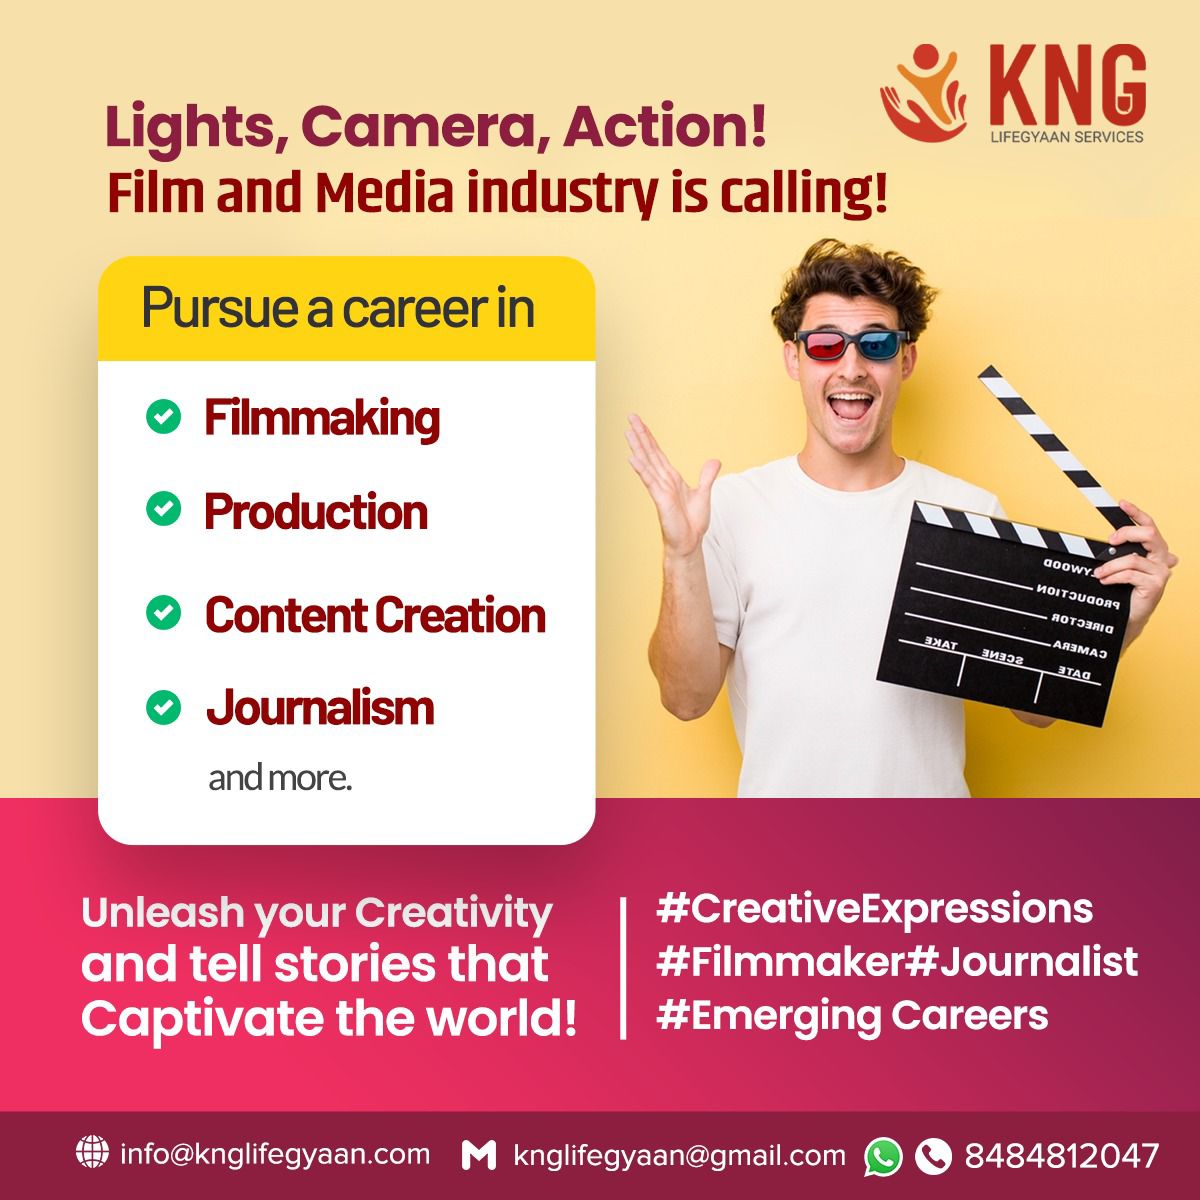 Lights, Camera, Action! 
Film and Media industry is calling! 
Pursue a career in Filmmaking,Production, Content Creation, Journalism and more. 
Unleash your Creativity and tell stories that Captivate the world!
 #CreativeExpressions #Filmmaker #Journalist #Emergingcareers